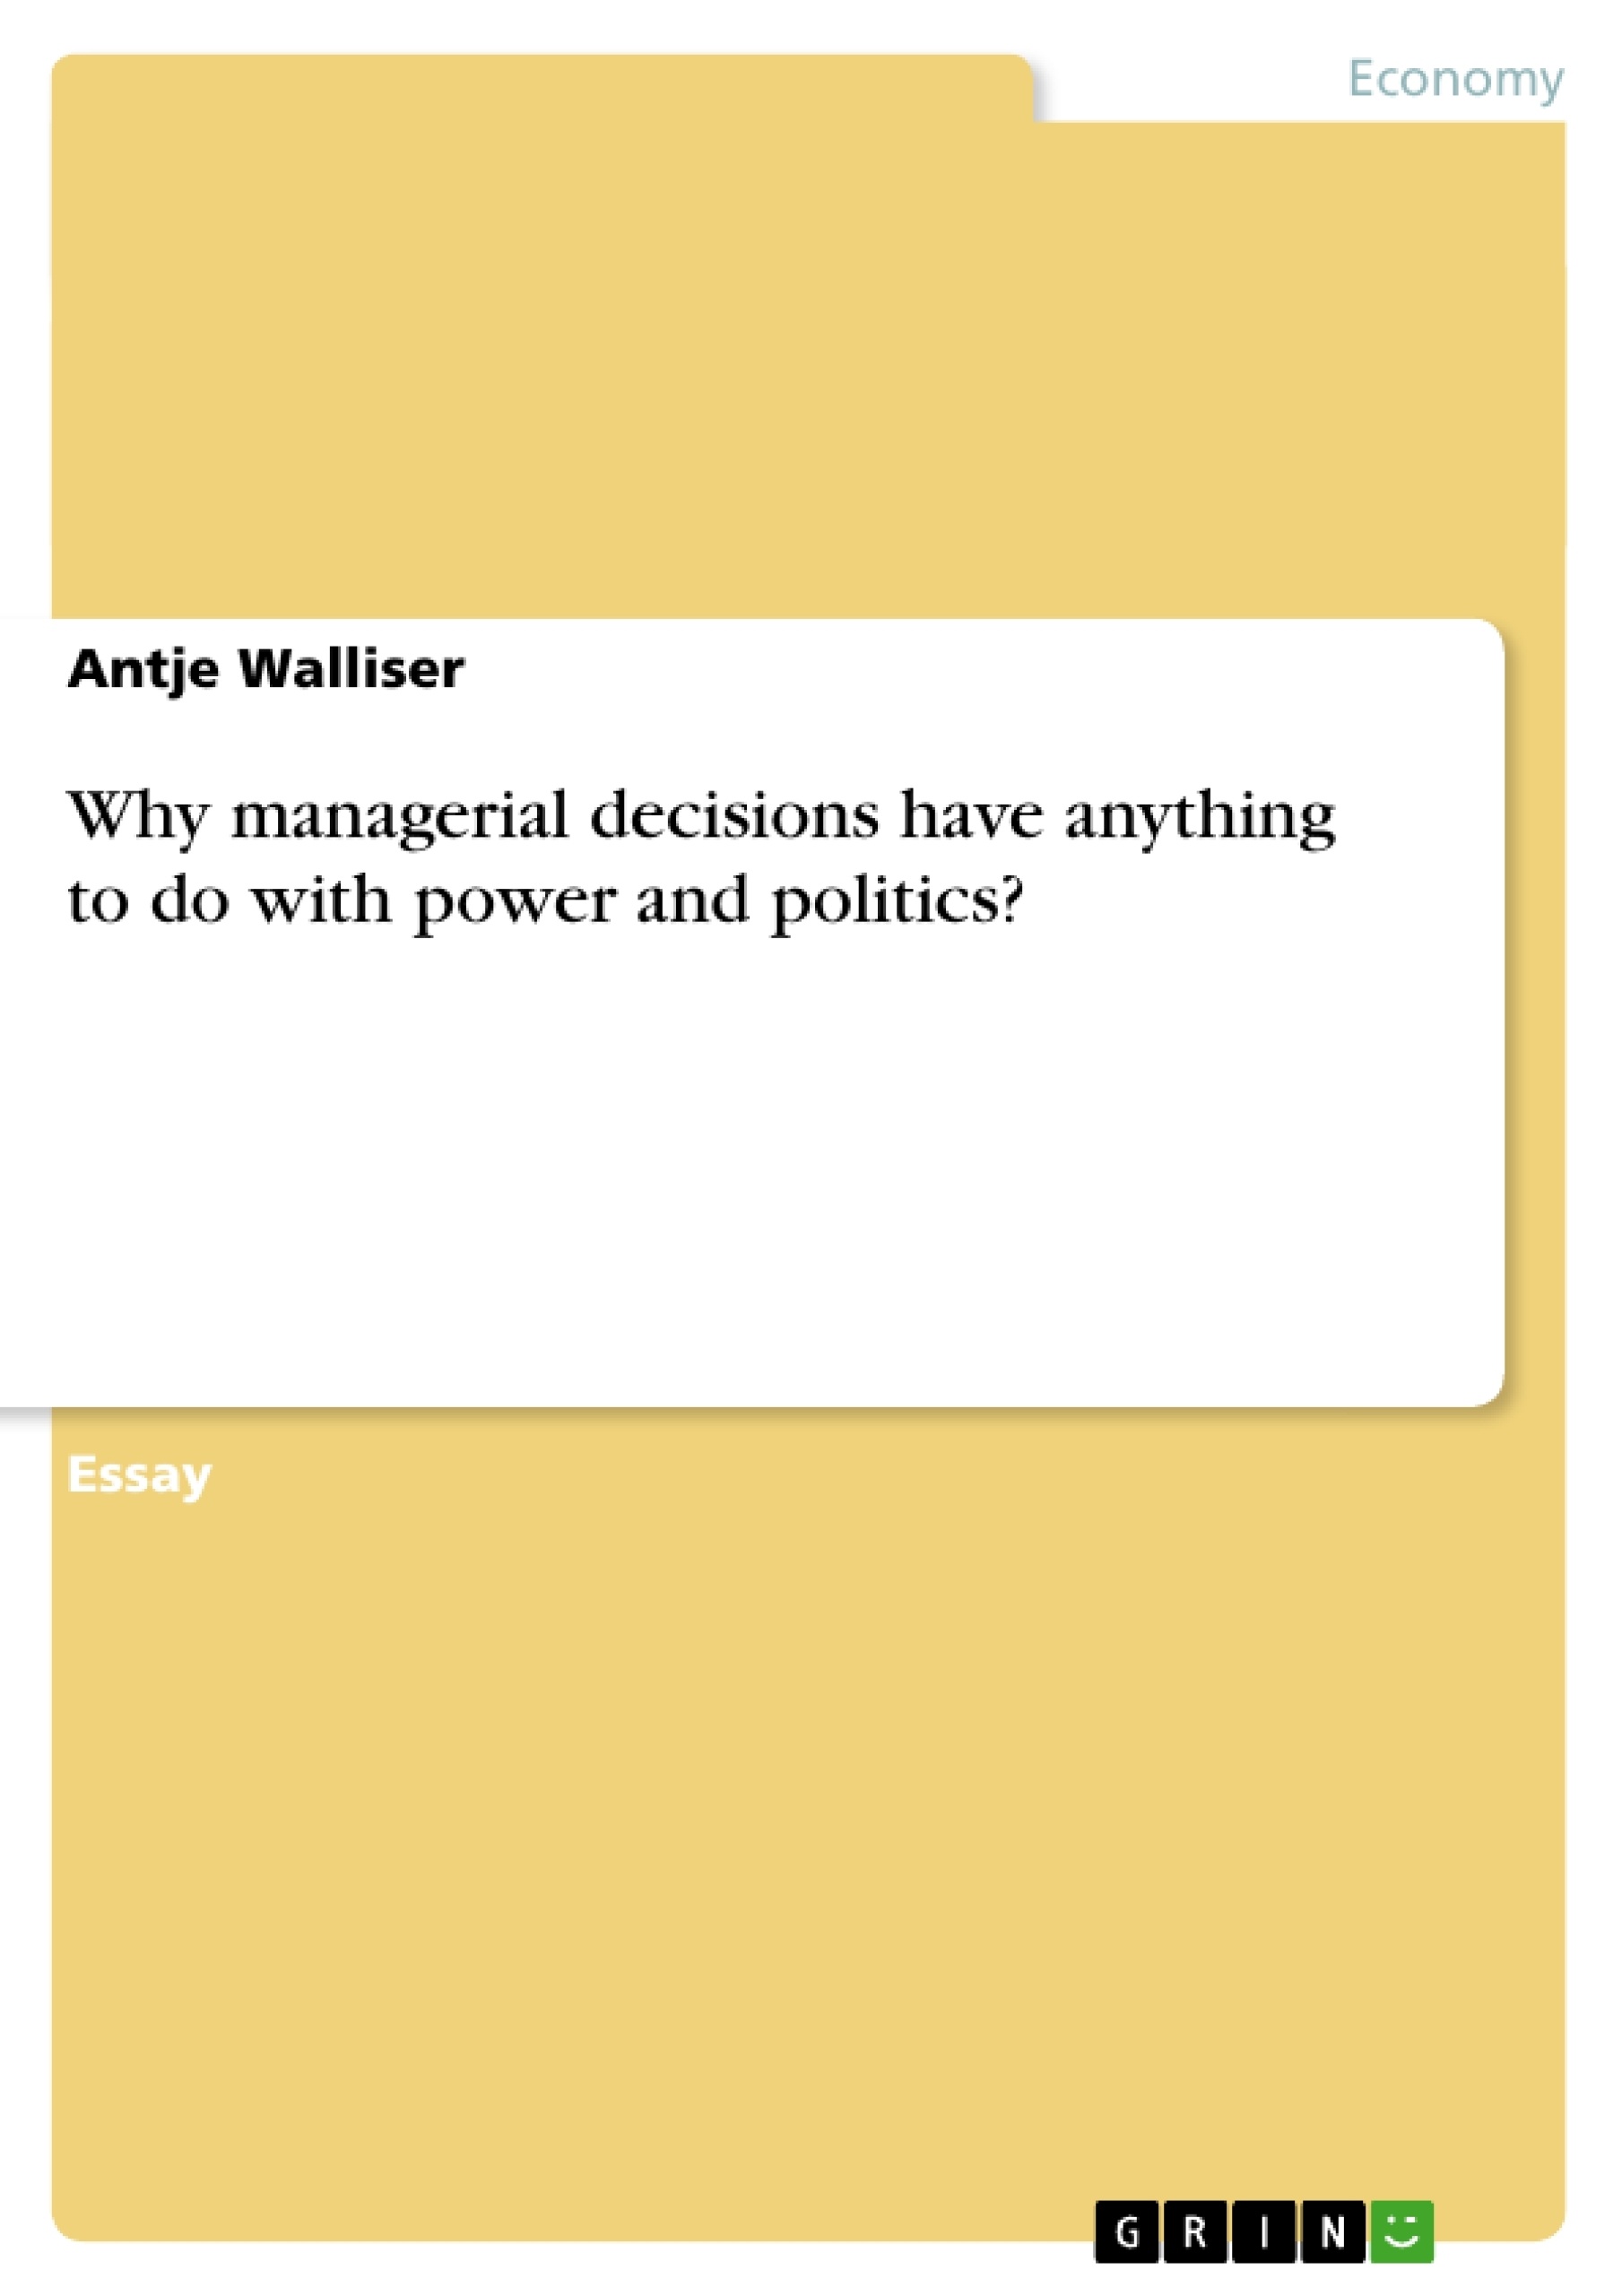 Title: Why managerial decisions have anything to do with power and politics?